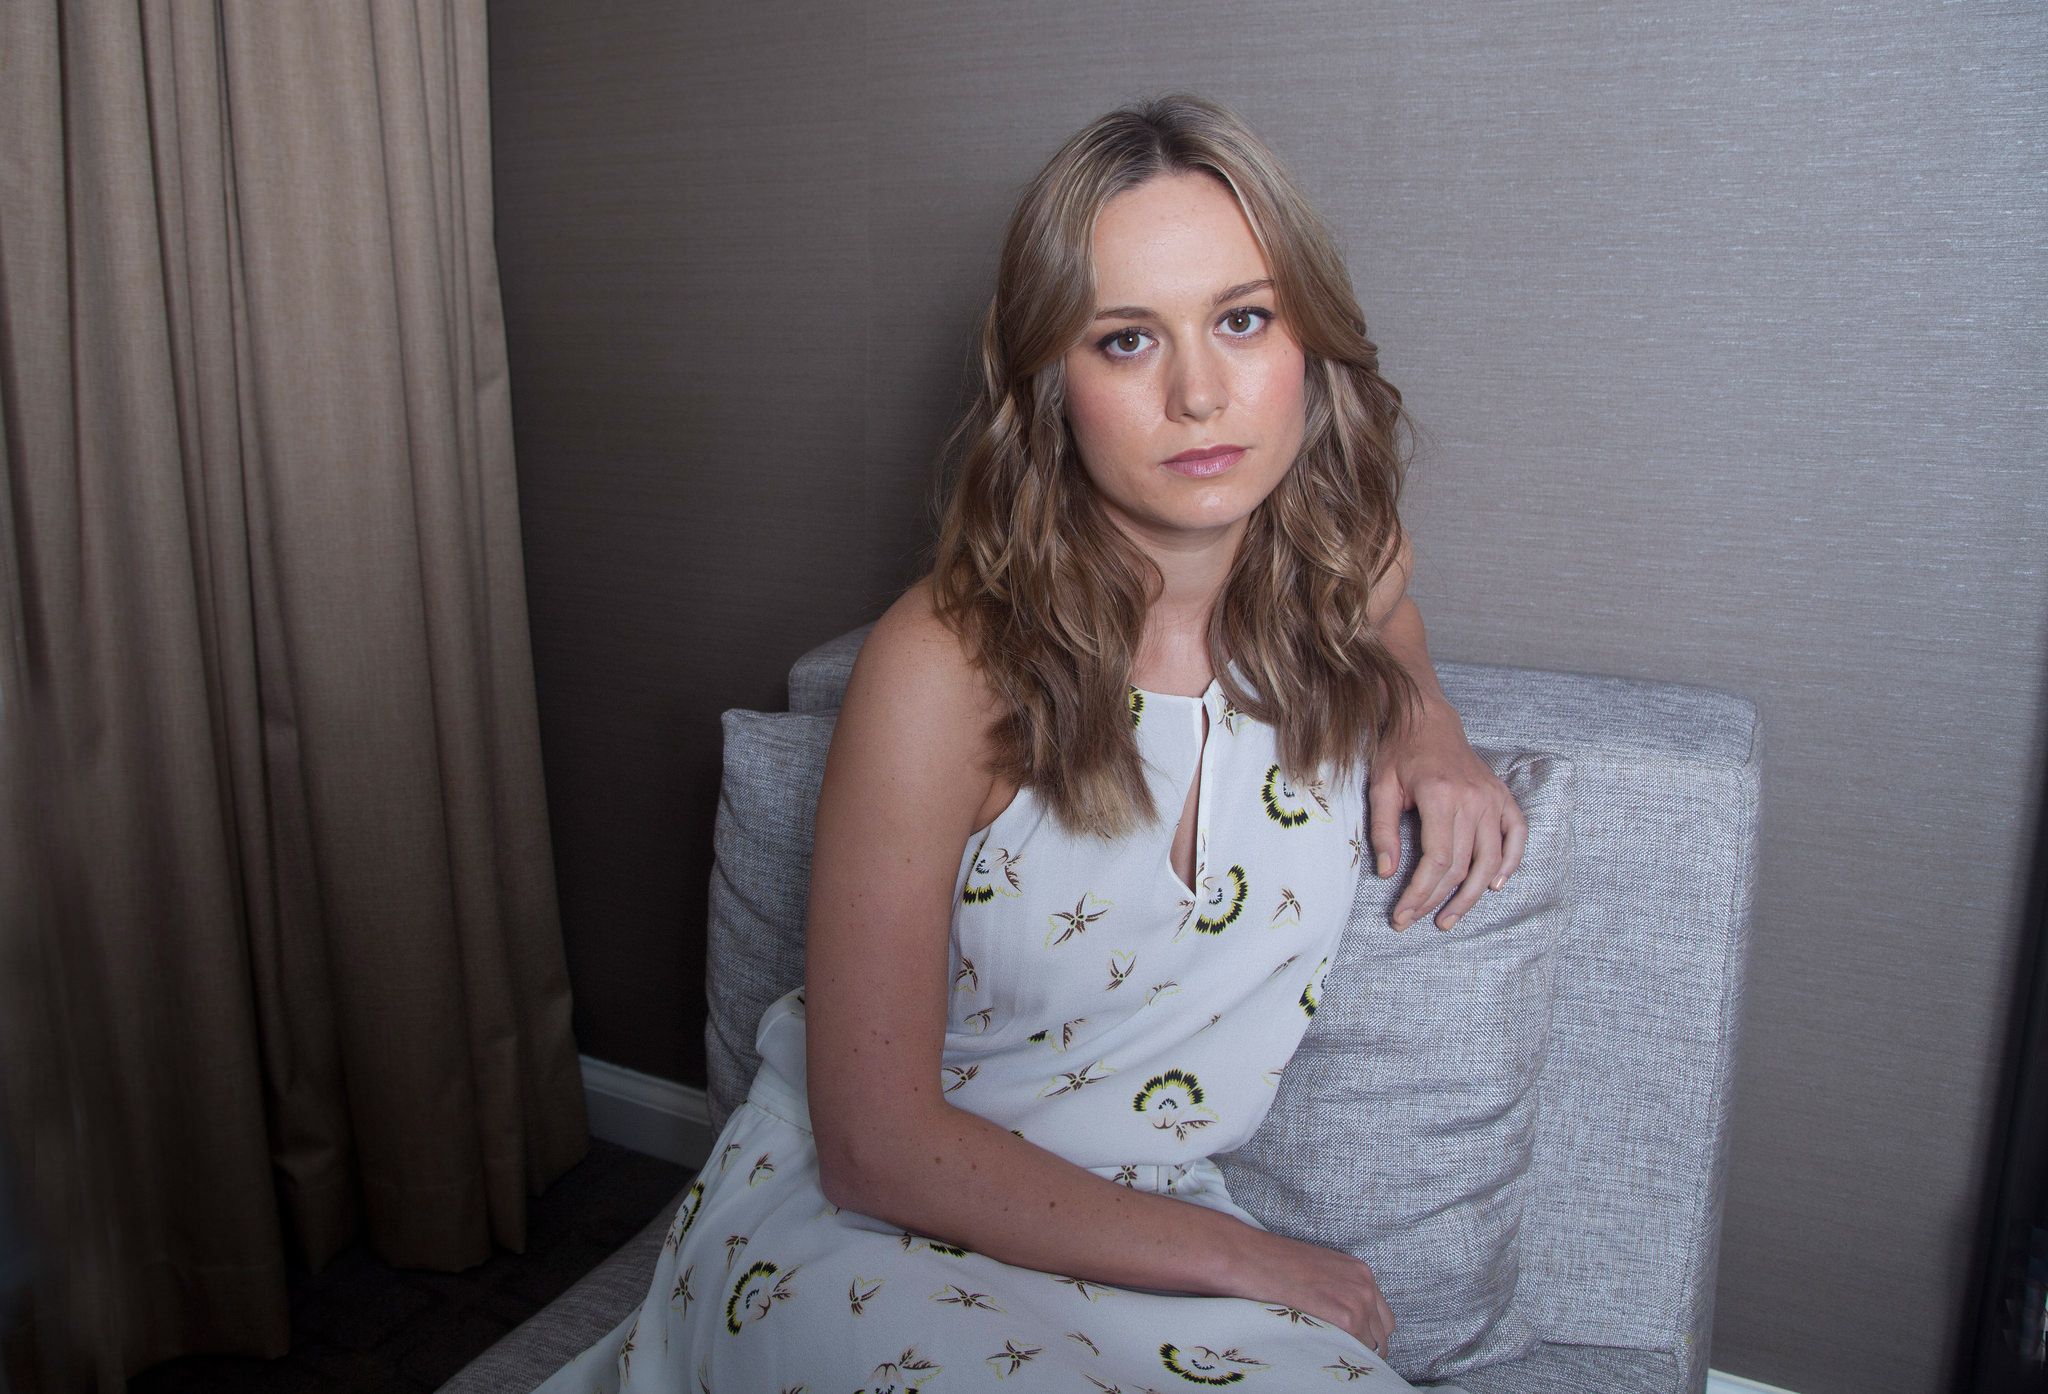 Brie Larson 2019 Photoshoot Wallpapers